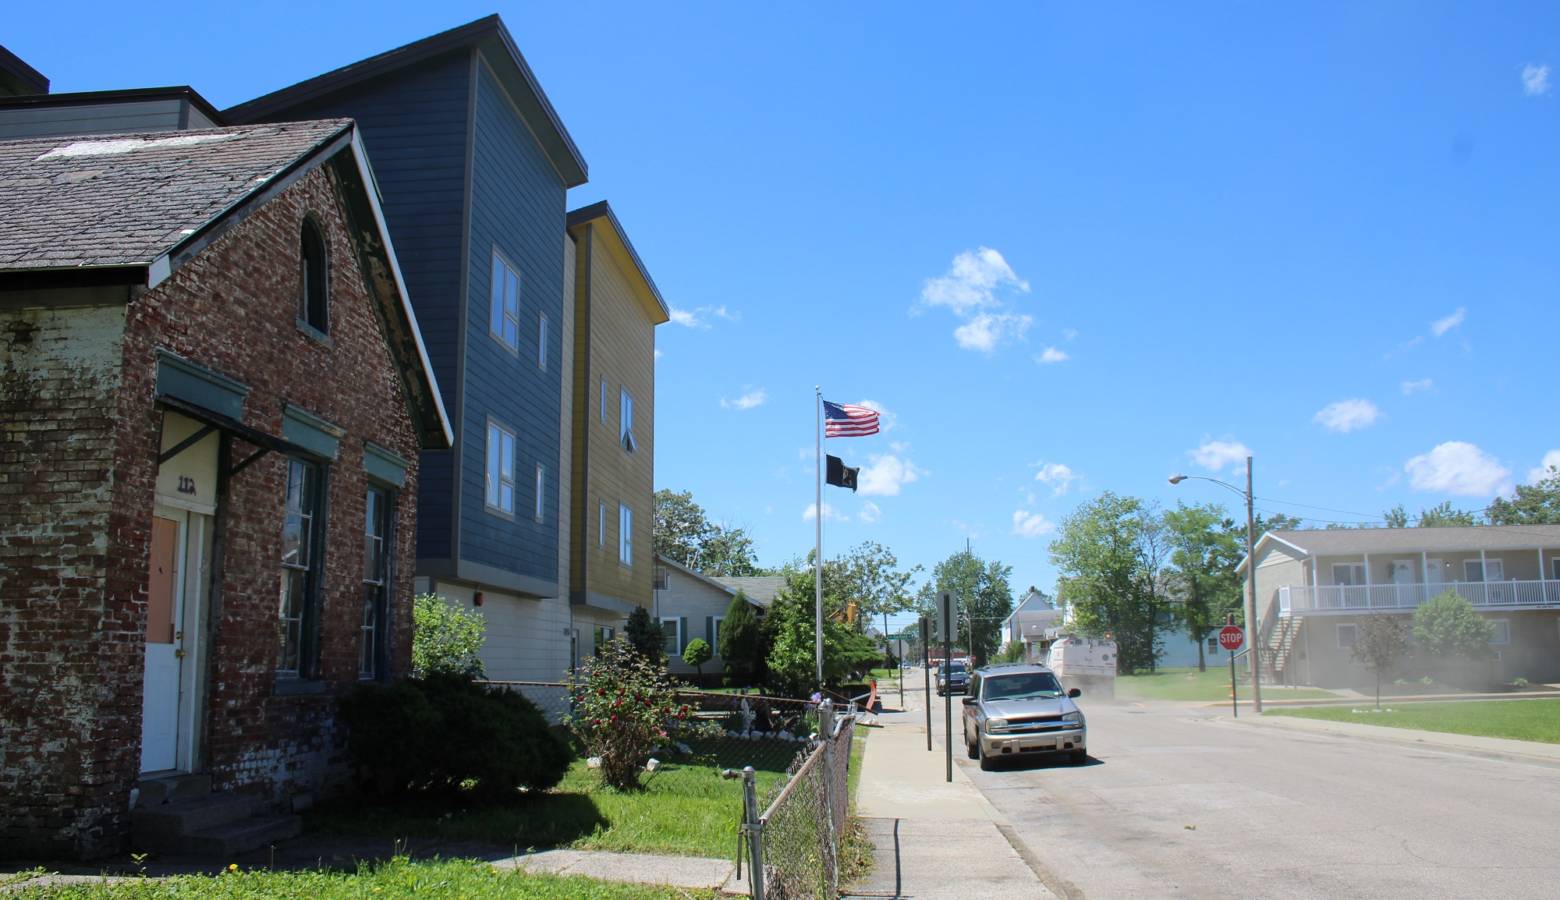 The Jacobsville neighborhood of Evansville is beginning to bounce back from decades of blight and a lengthy lead cleanup process. Here, new veterans' housing mingles with EPA-laid sod and lingering vacant homes. (Annie Ropeik/IPB News)